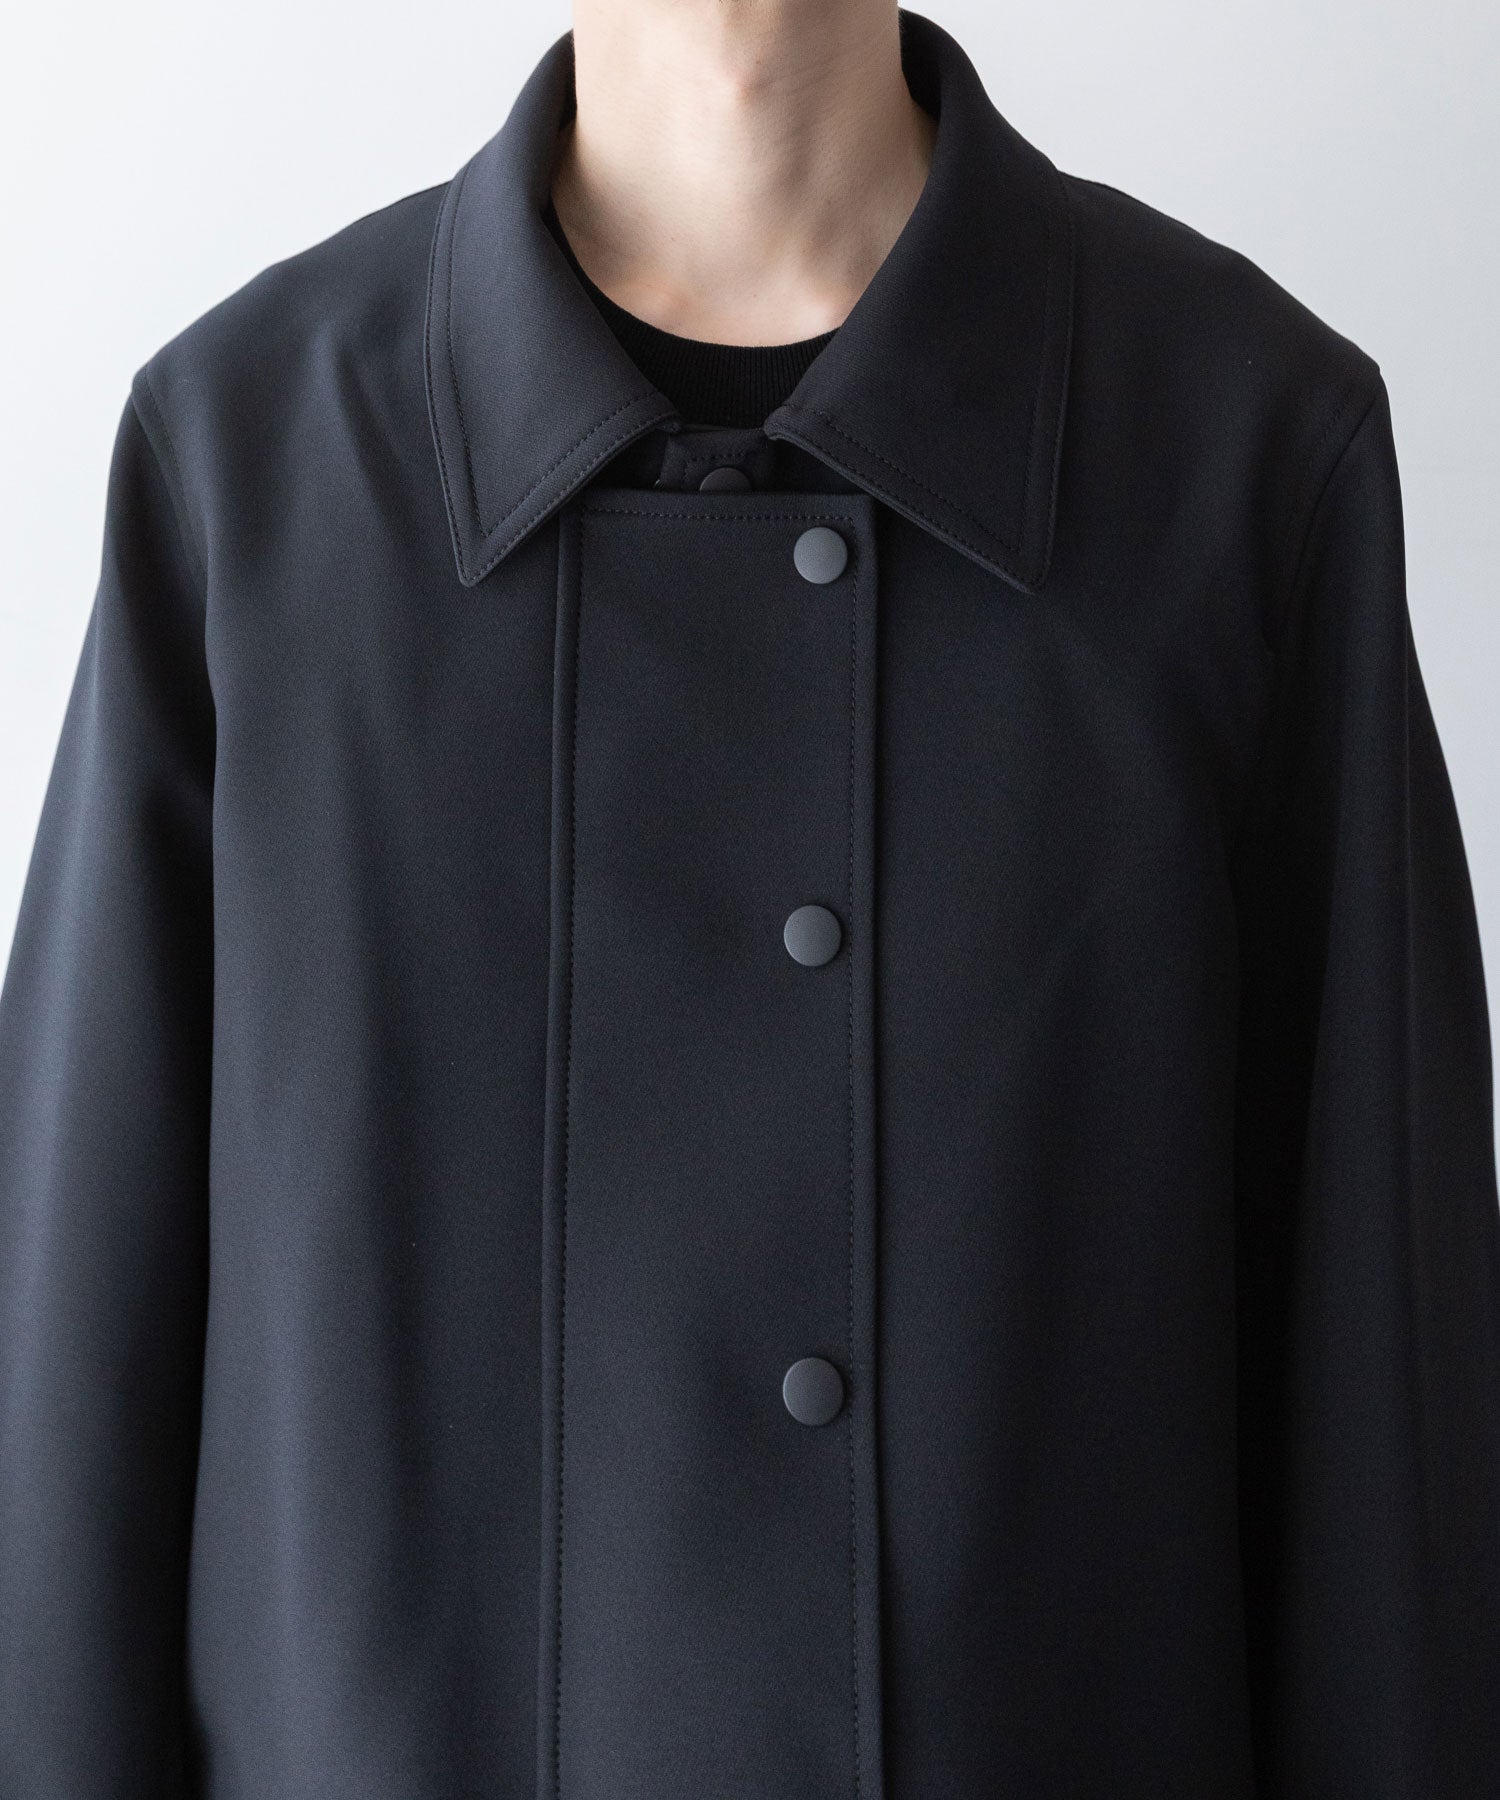 UJOH】DOUBLE FRONT BLOUSON - BLACK | 公式通販サイト session 